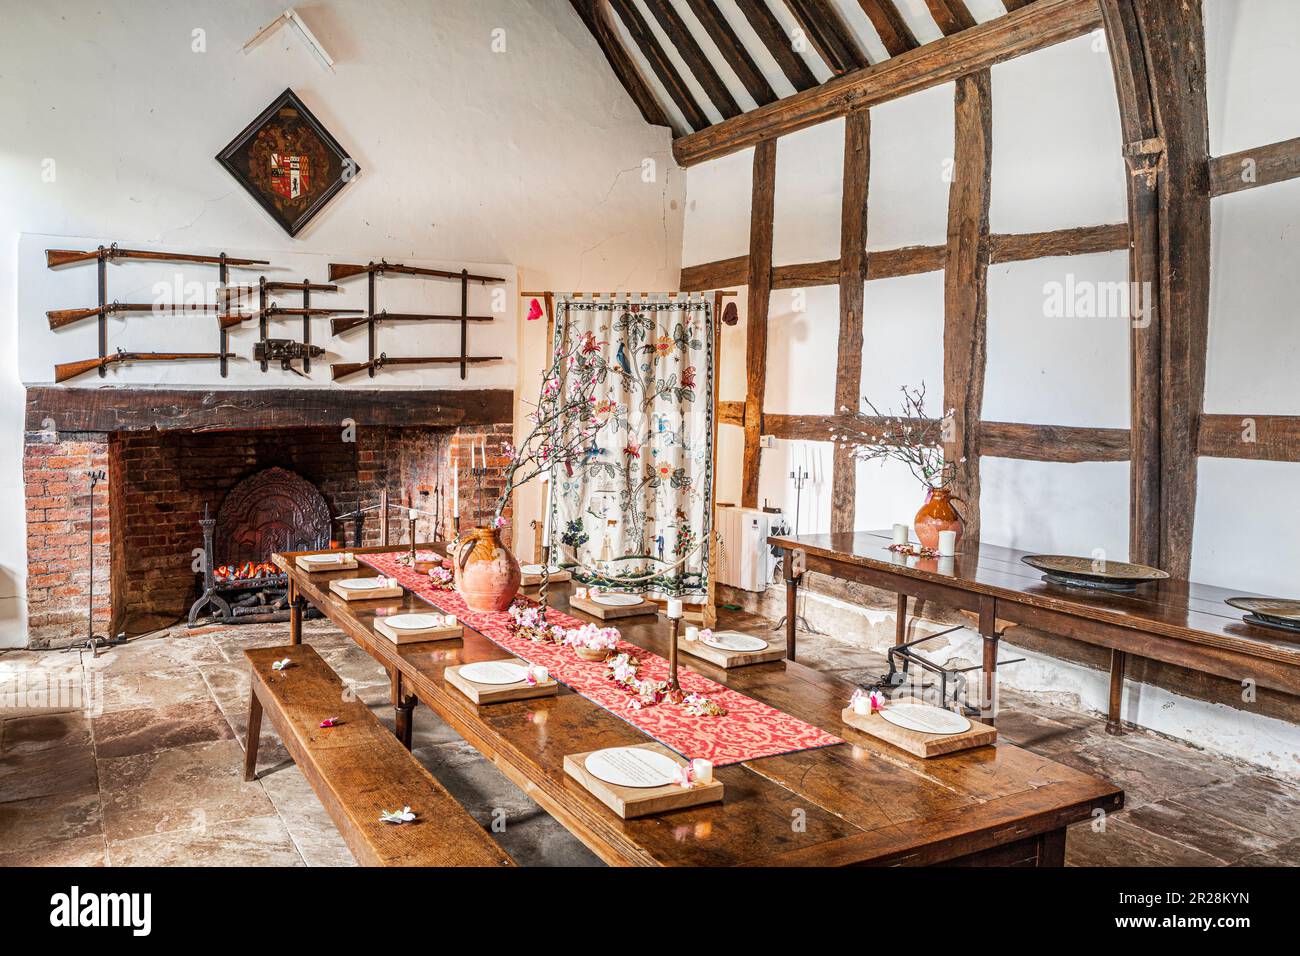 The interior of the late 14th or early 15th century timber framed Lower Brockhampton Manor House near Bromyard, Herefordshire, England UK Stock Photo